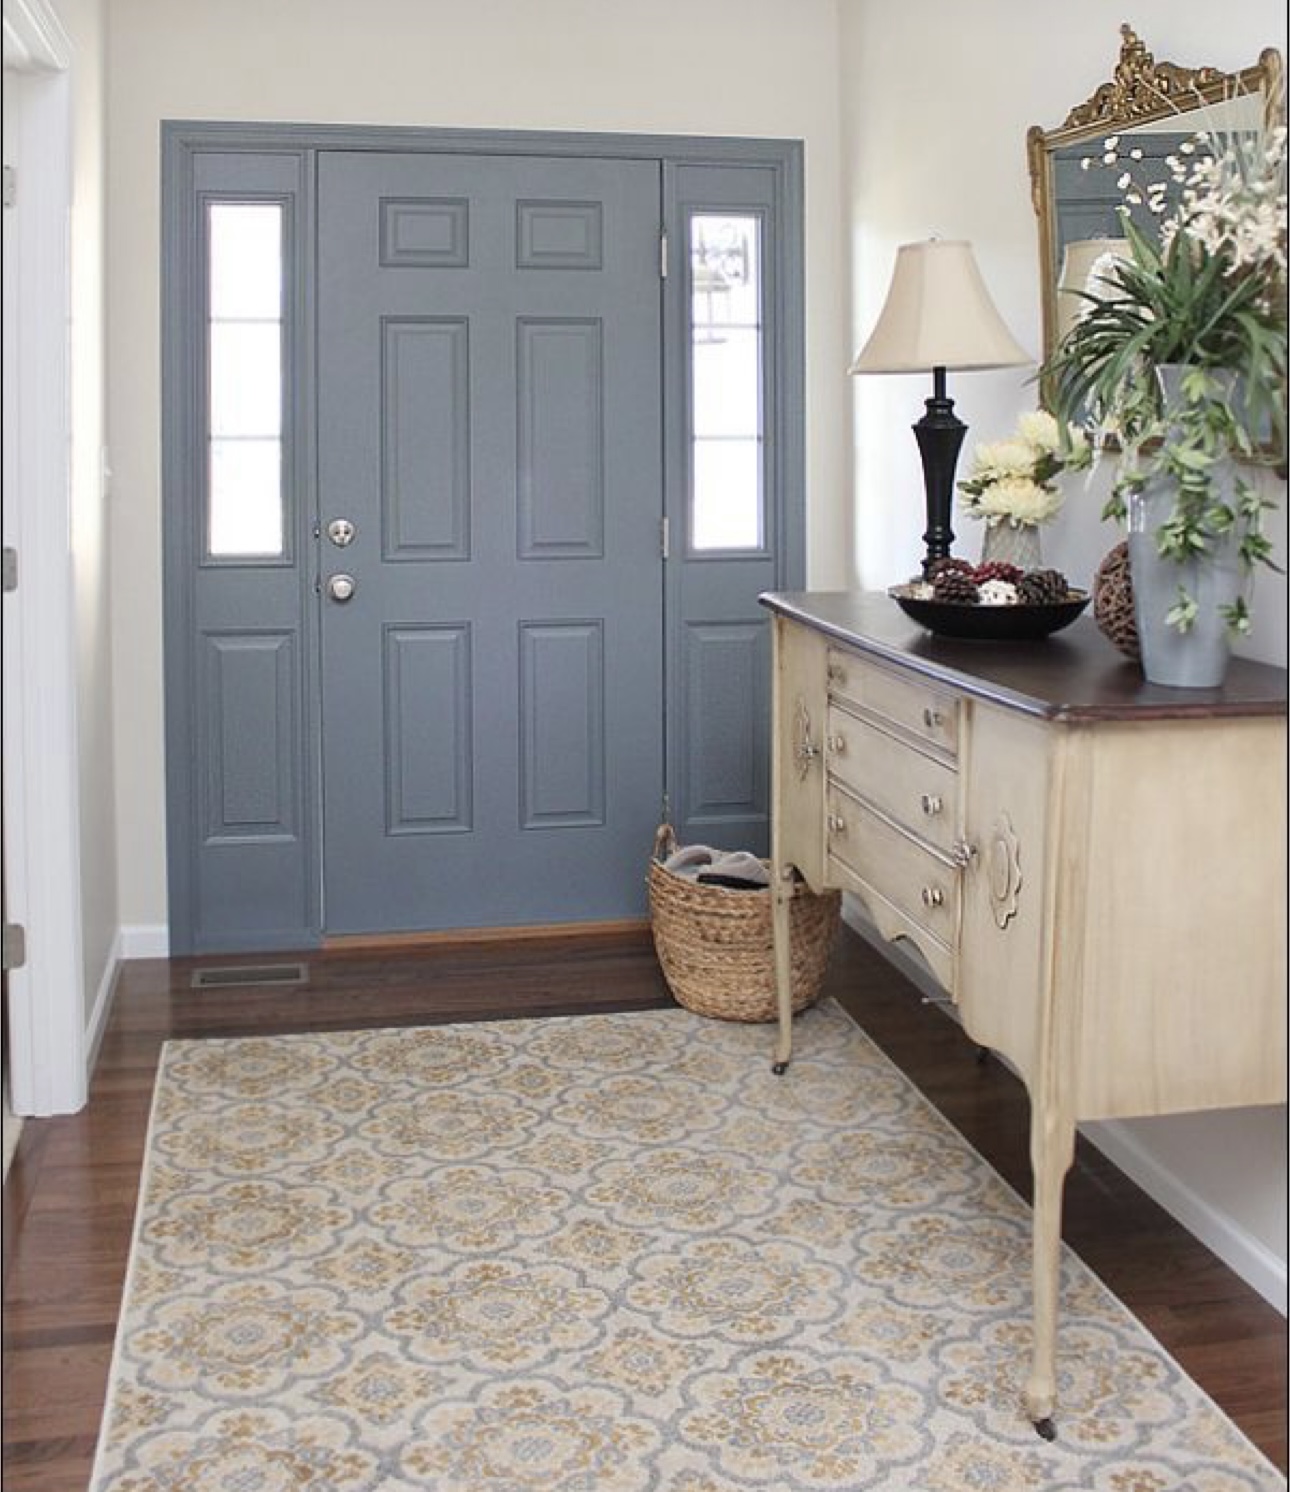 An example of the trim color matching the door color